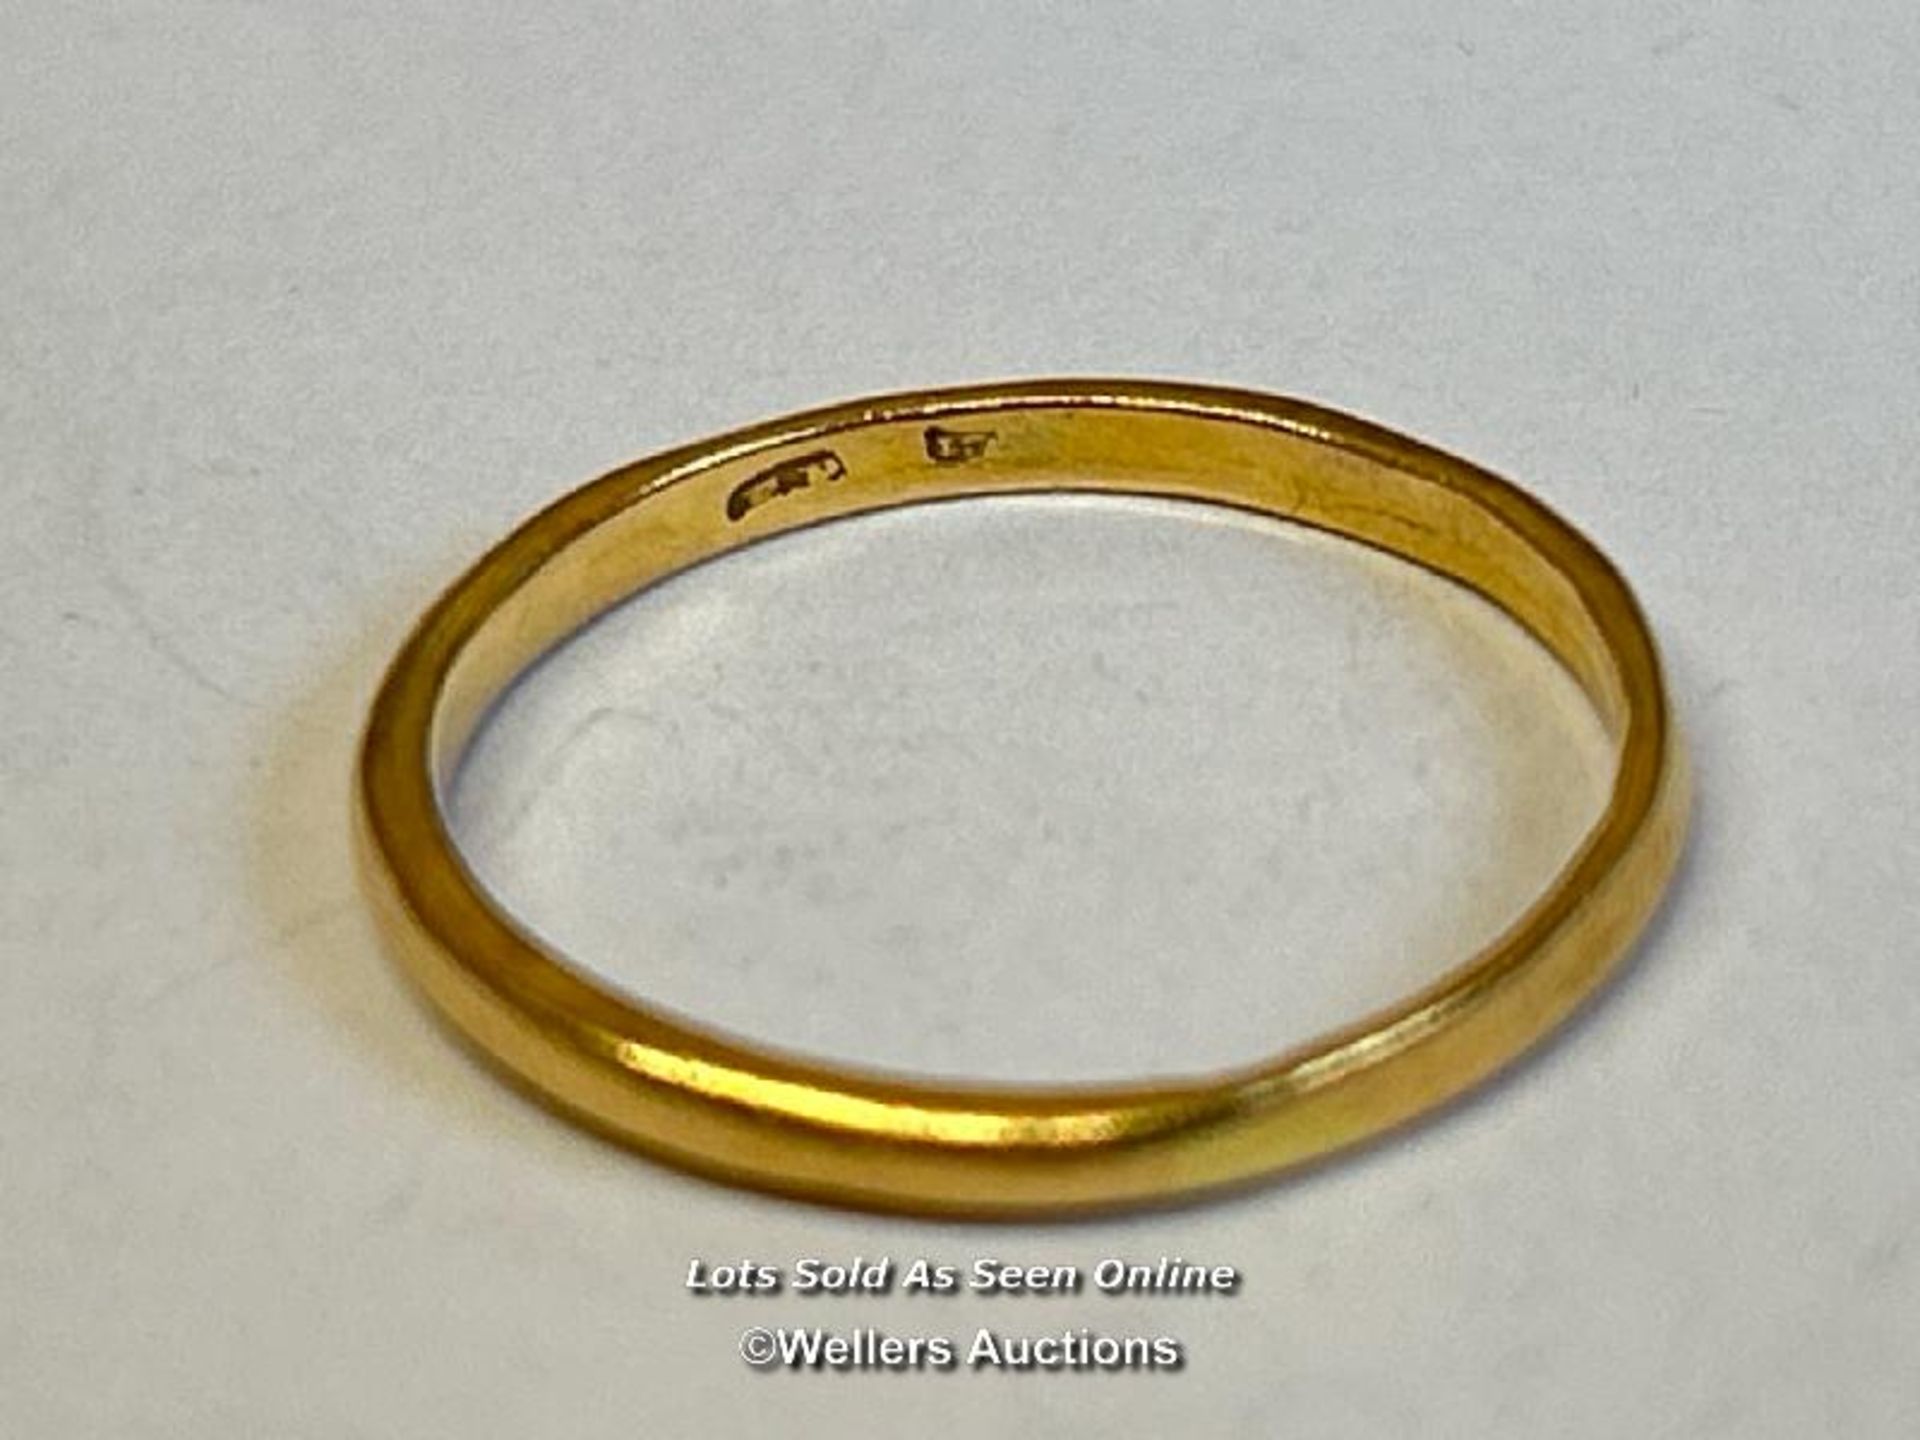 Wedding band, hallmarked rubbed, acid tests as 22ct gold, ring size Q. Gross weight 2.32g - Image 2 of 2